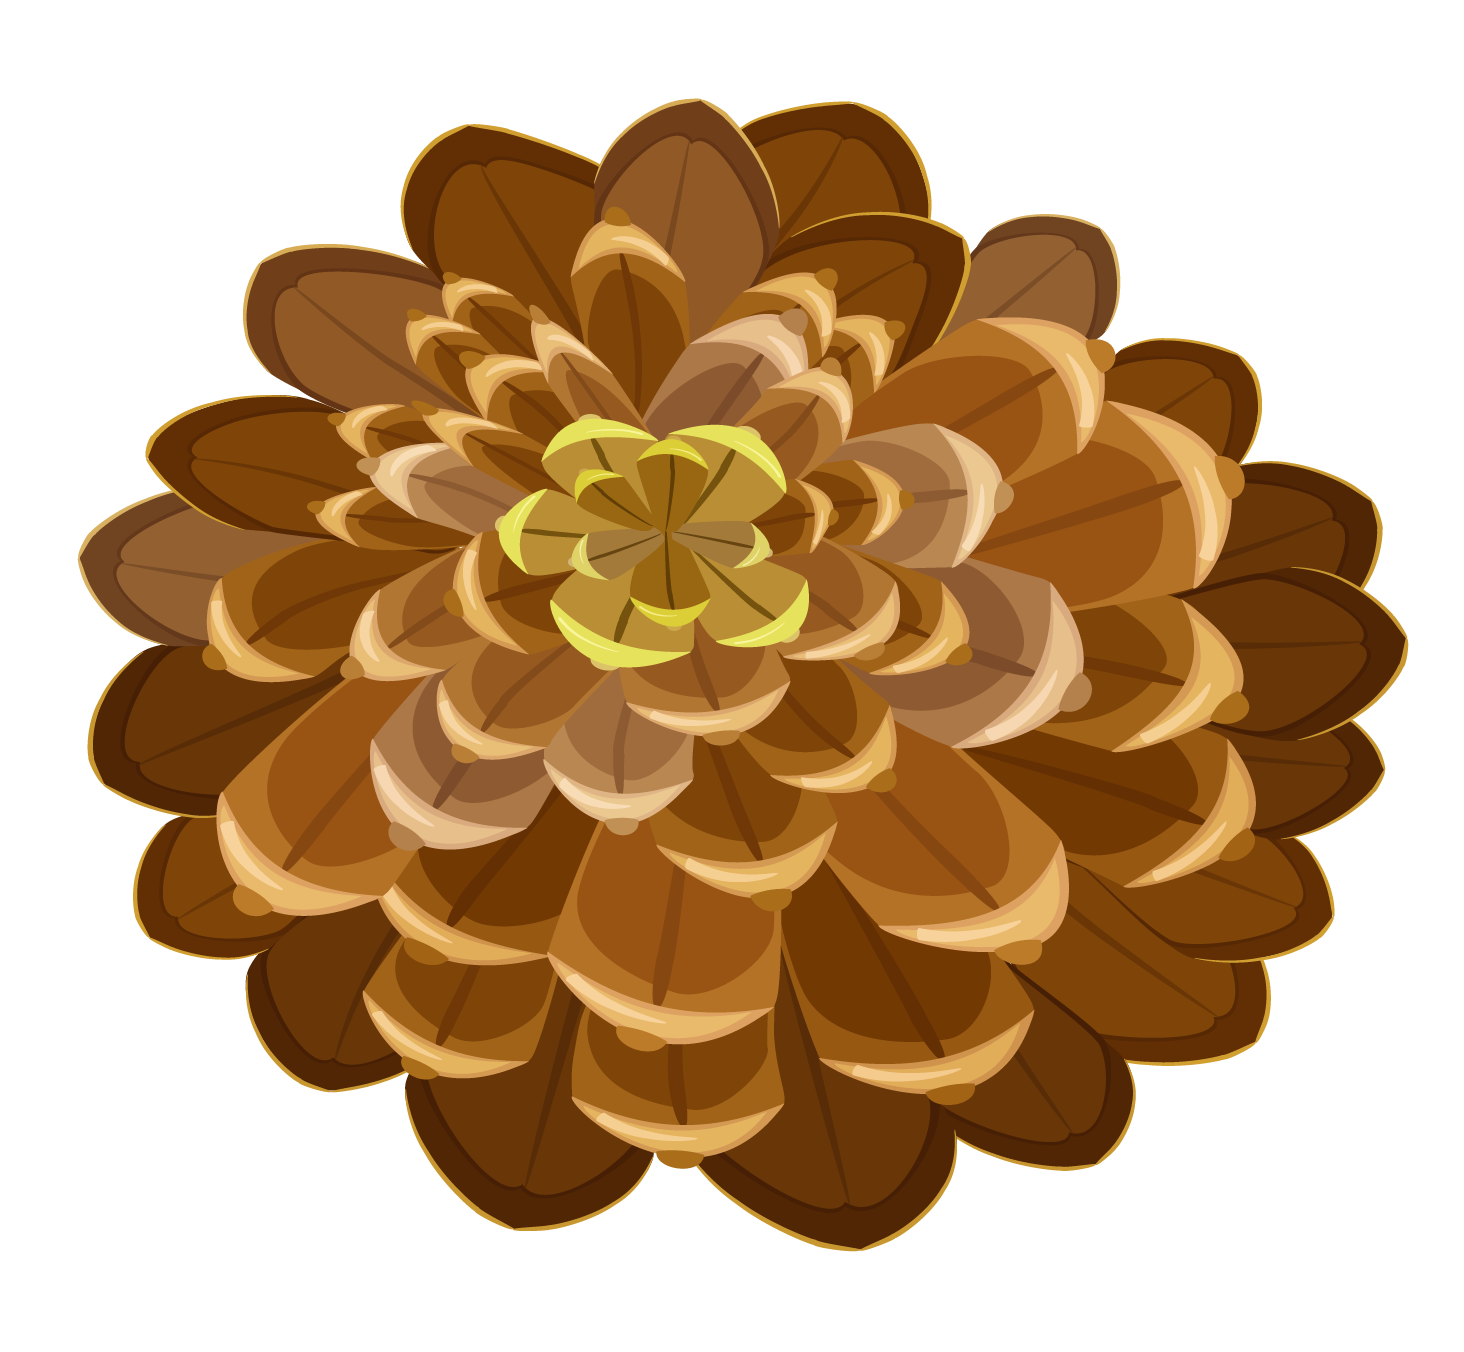 Pine cone png image. Pinecone clipart clip art